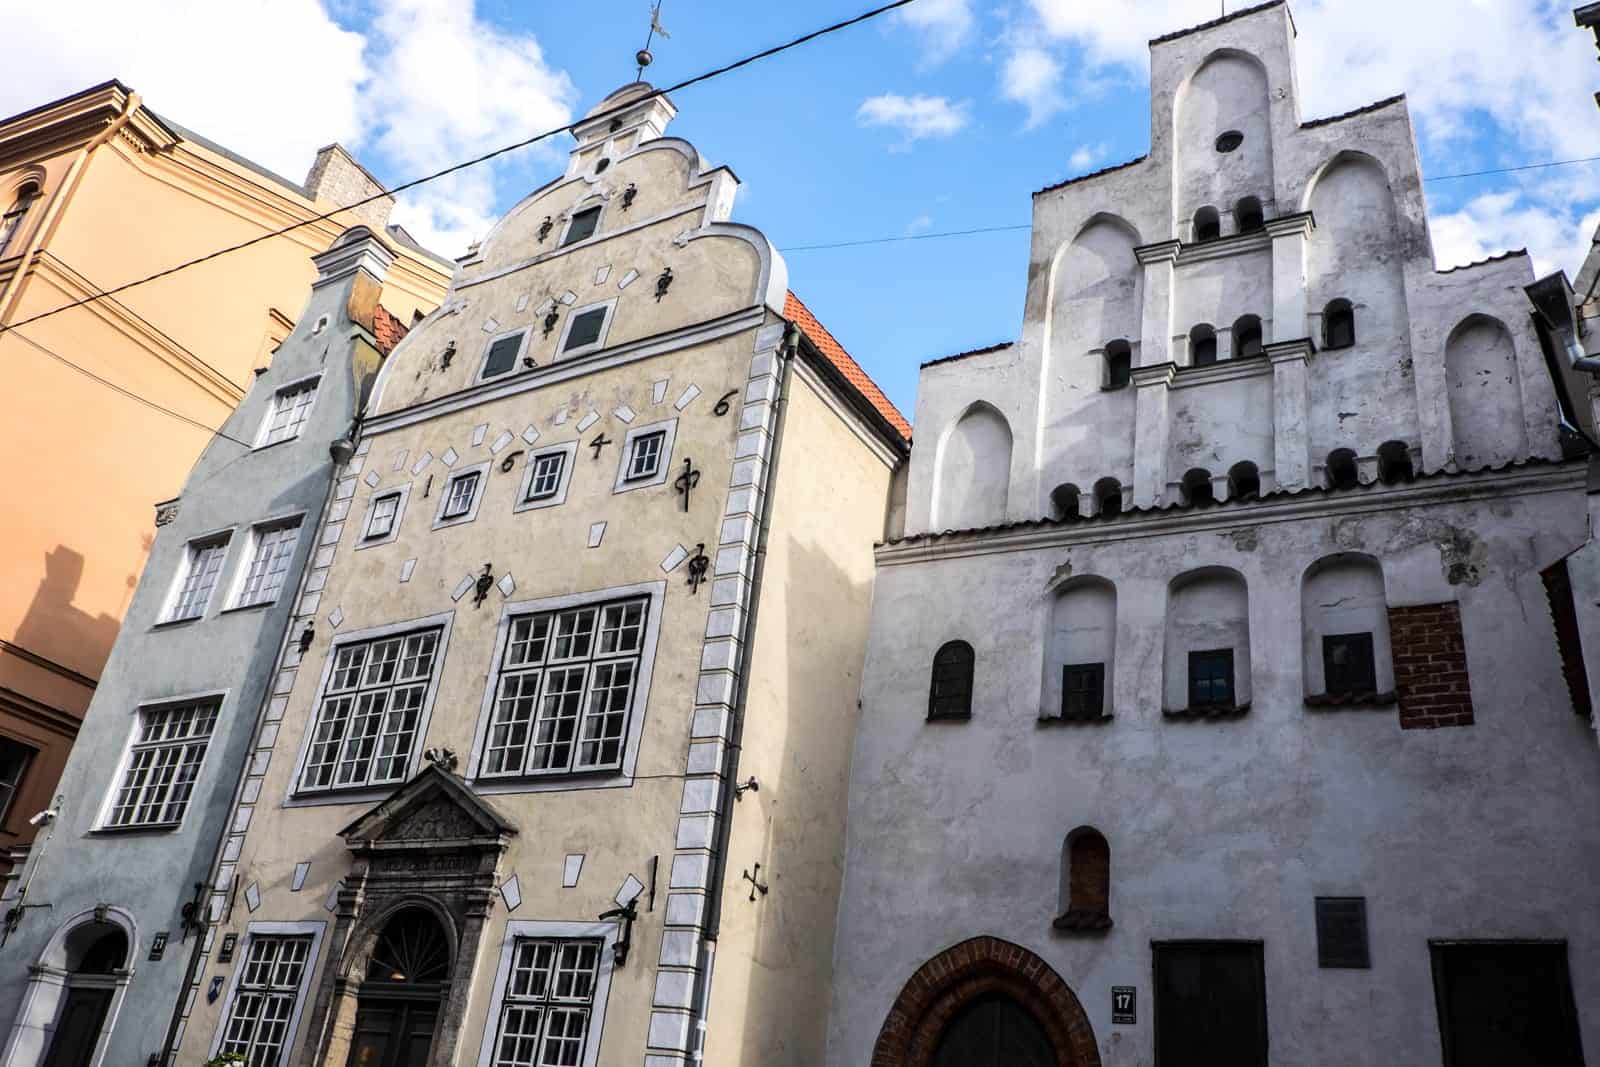 The famous Three Brothers buildings in Riga, Latvia 